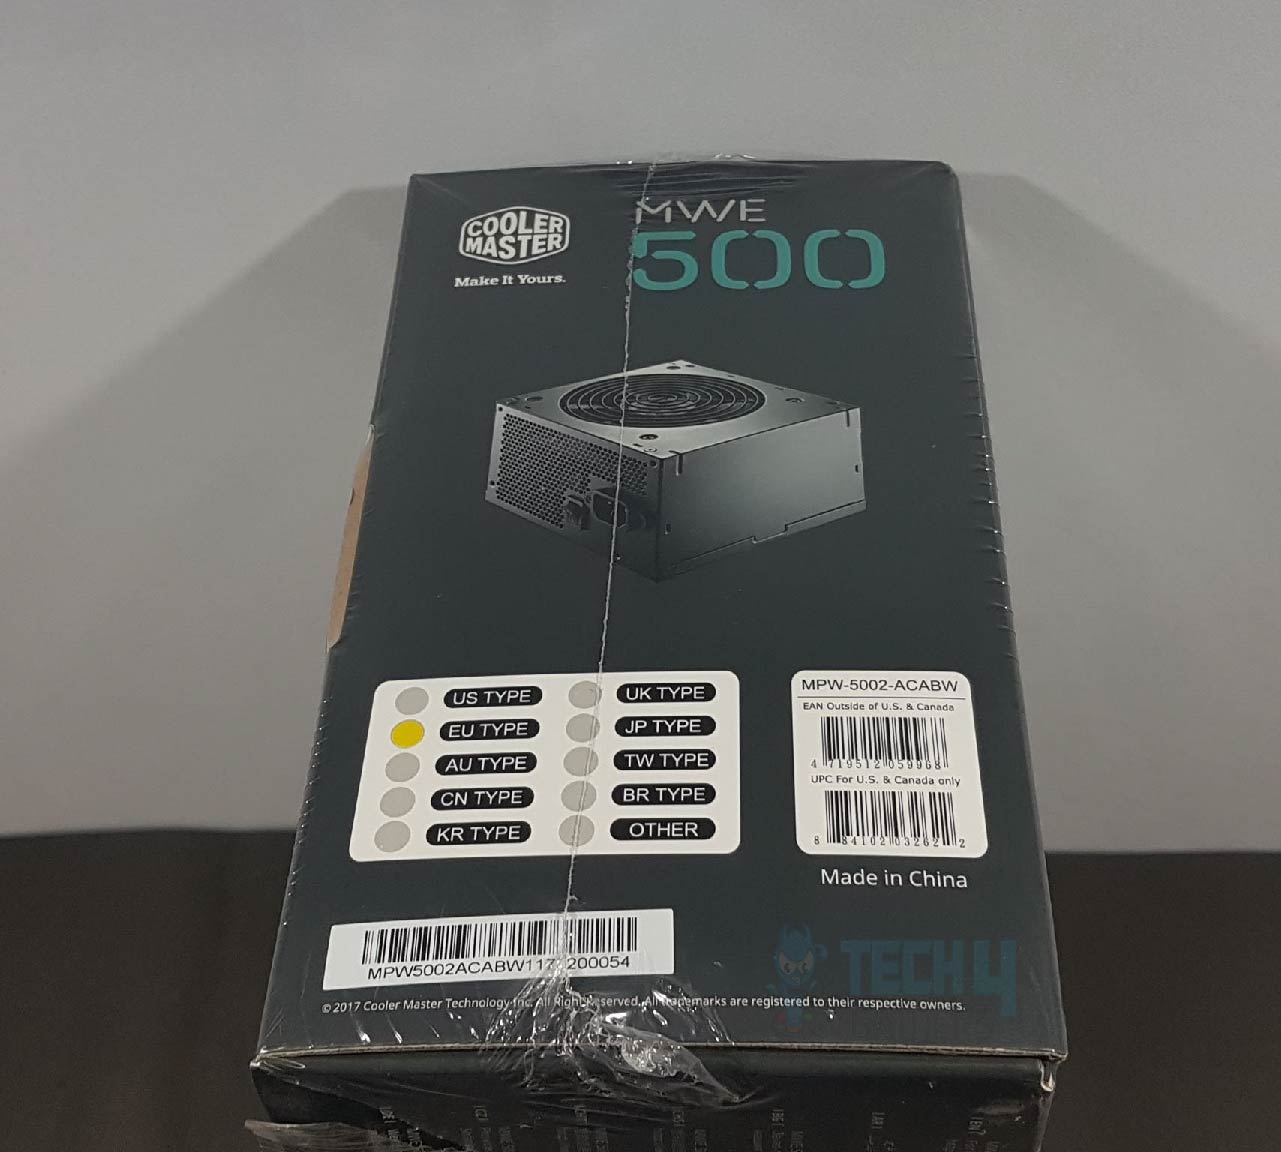 MWE 500 Front Packaging